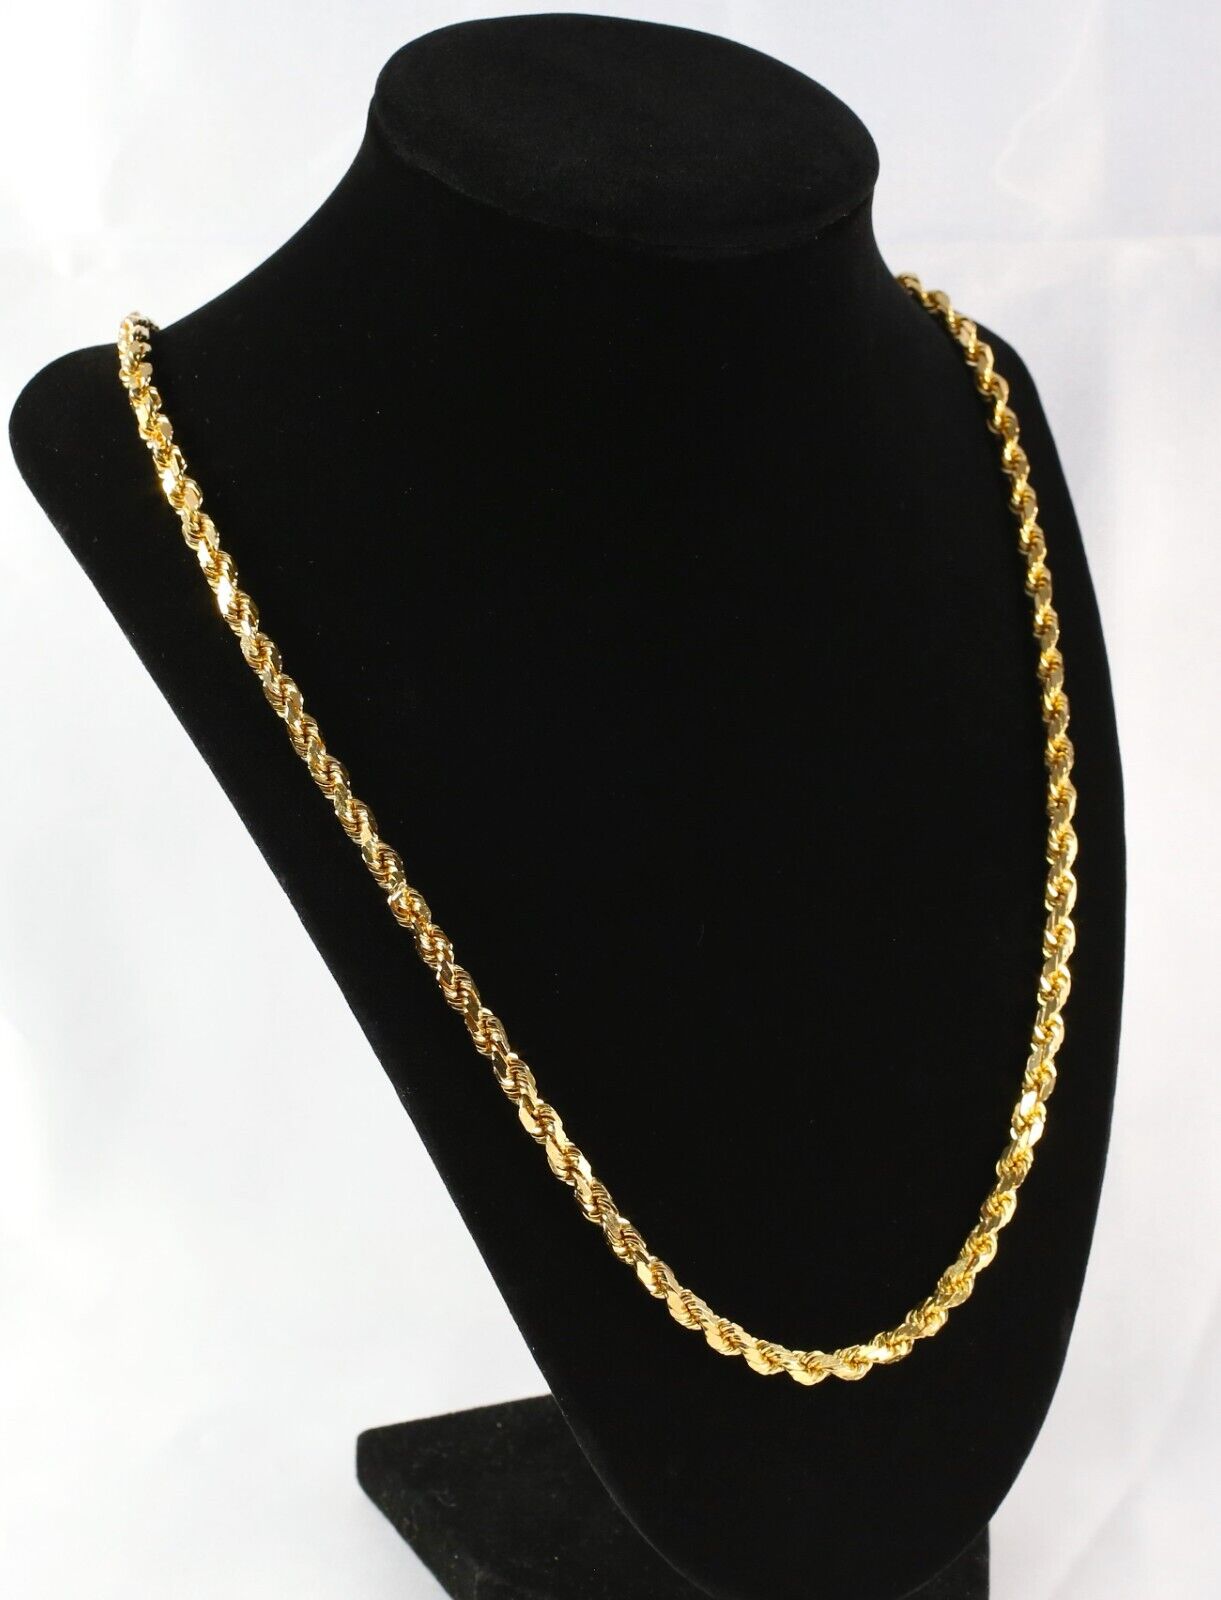 22k Yellow Gold Solid Diamond Cut Rope Chain, 23 inches - 66.1g